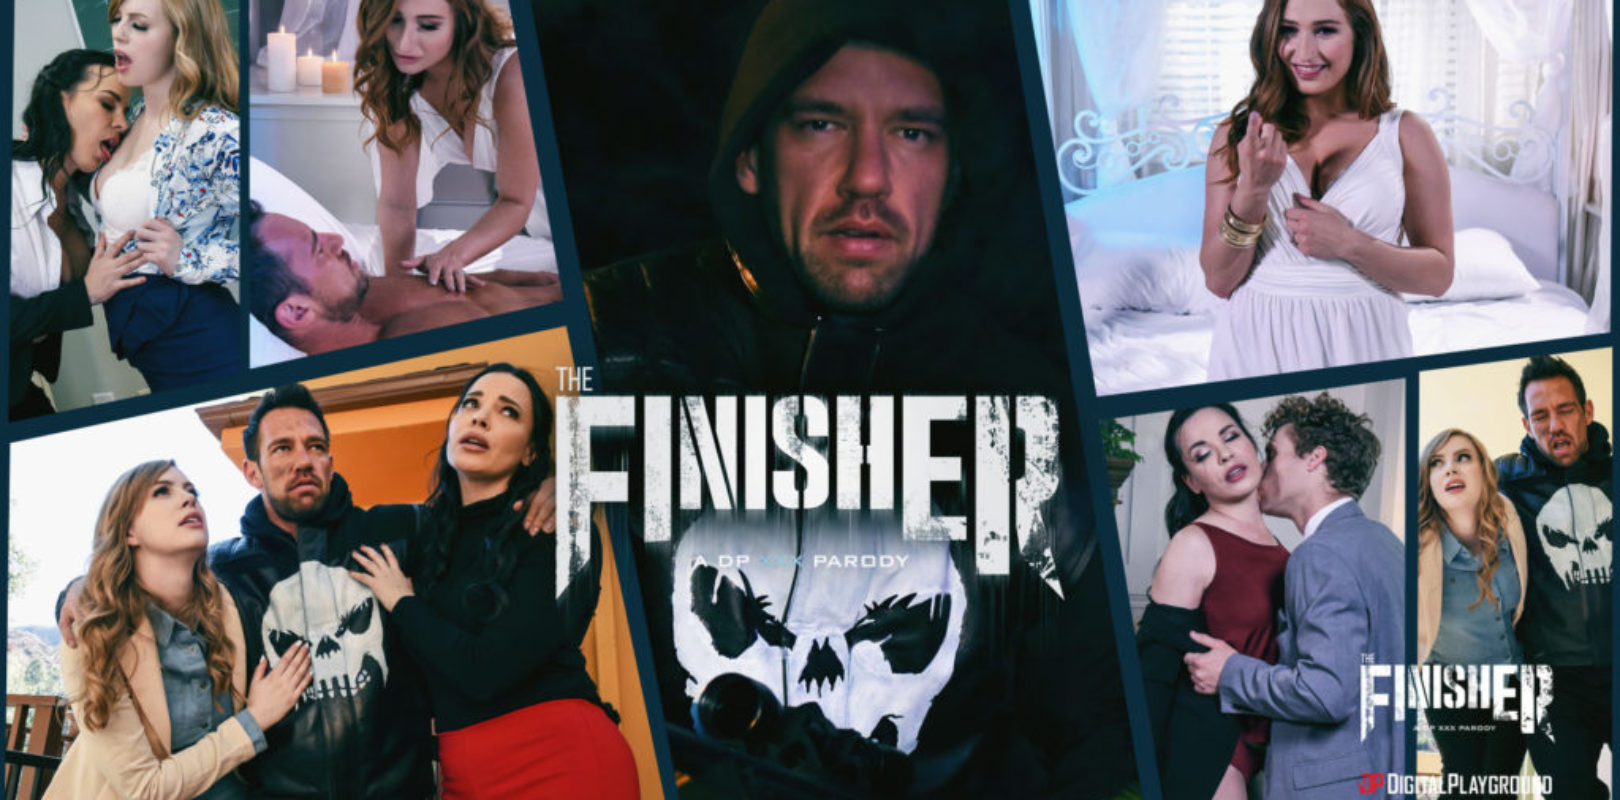 Shake It Up Sex Fanfic - Punisher Erotic Fan Fic? Yup. Check Out The Finisher! - The ...